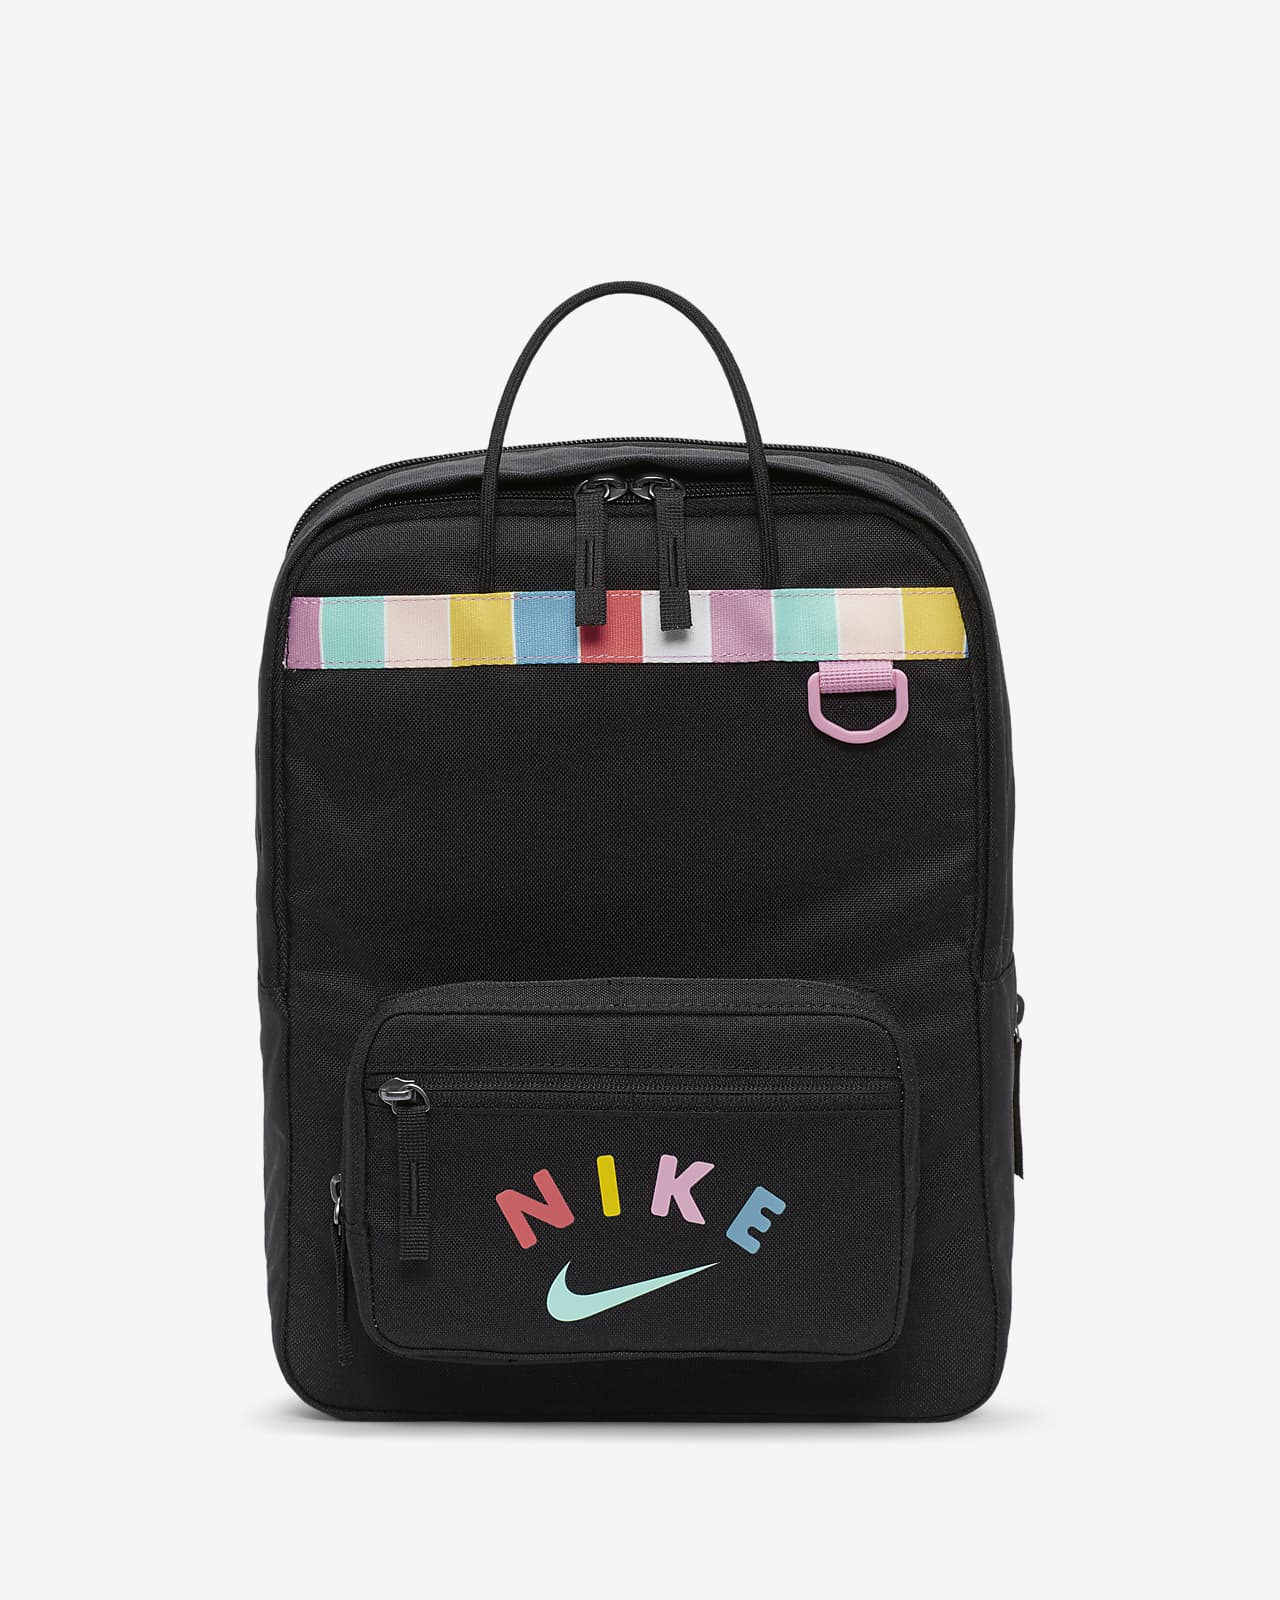 pictures of nike backpacks